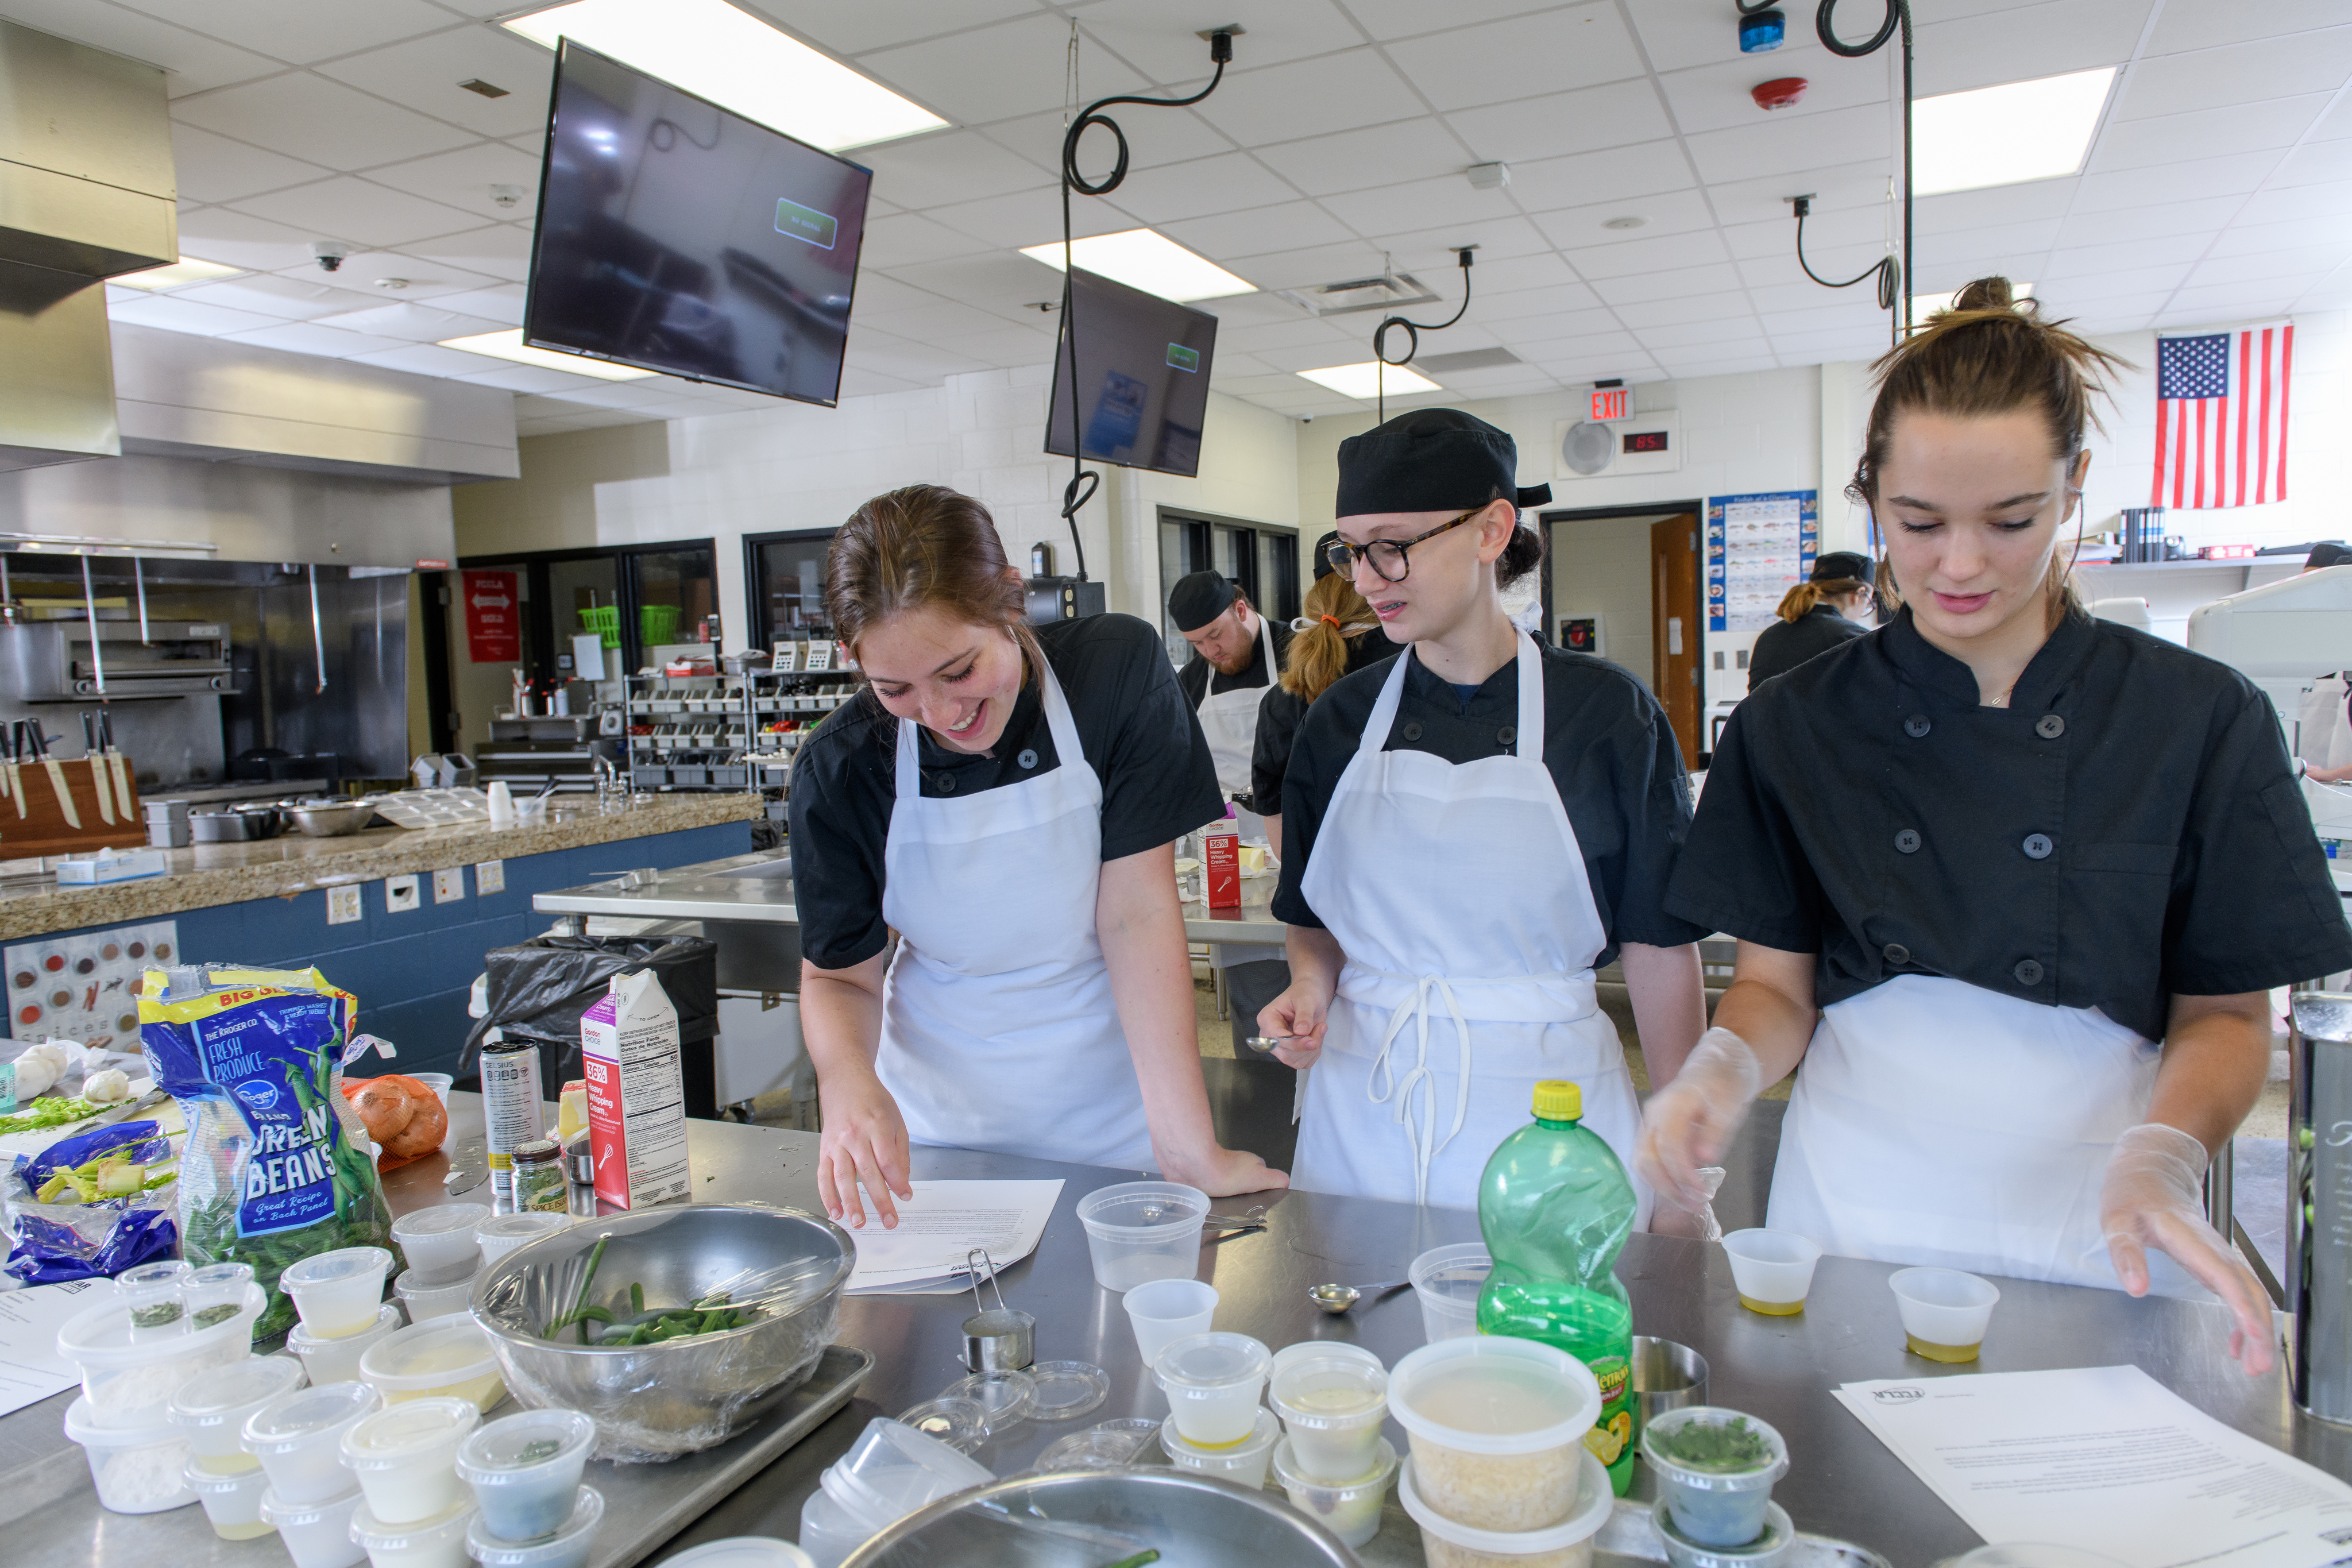 Three Culinary students work together in the lab on a recipe.